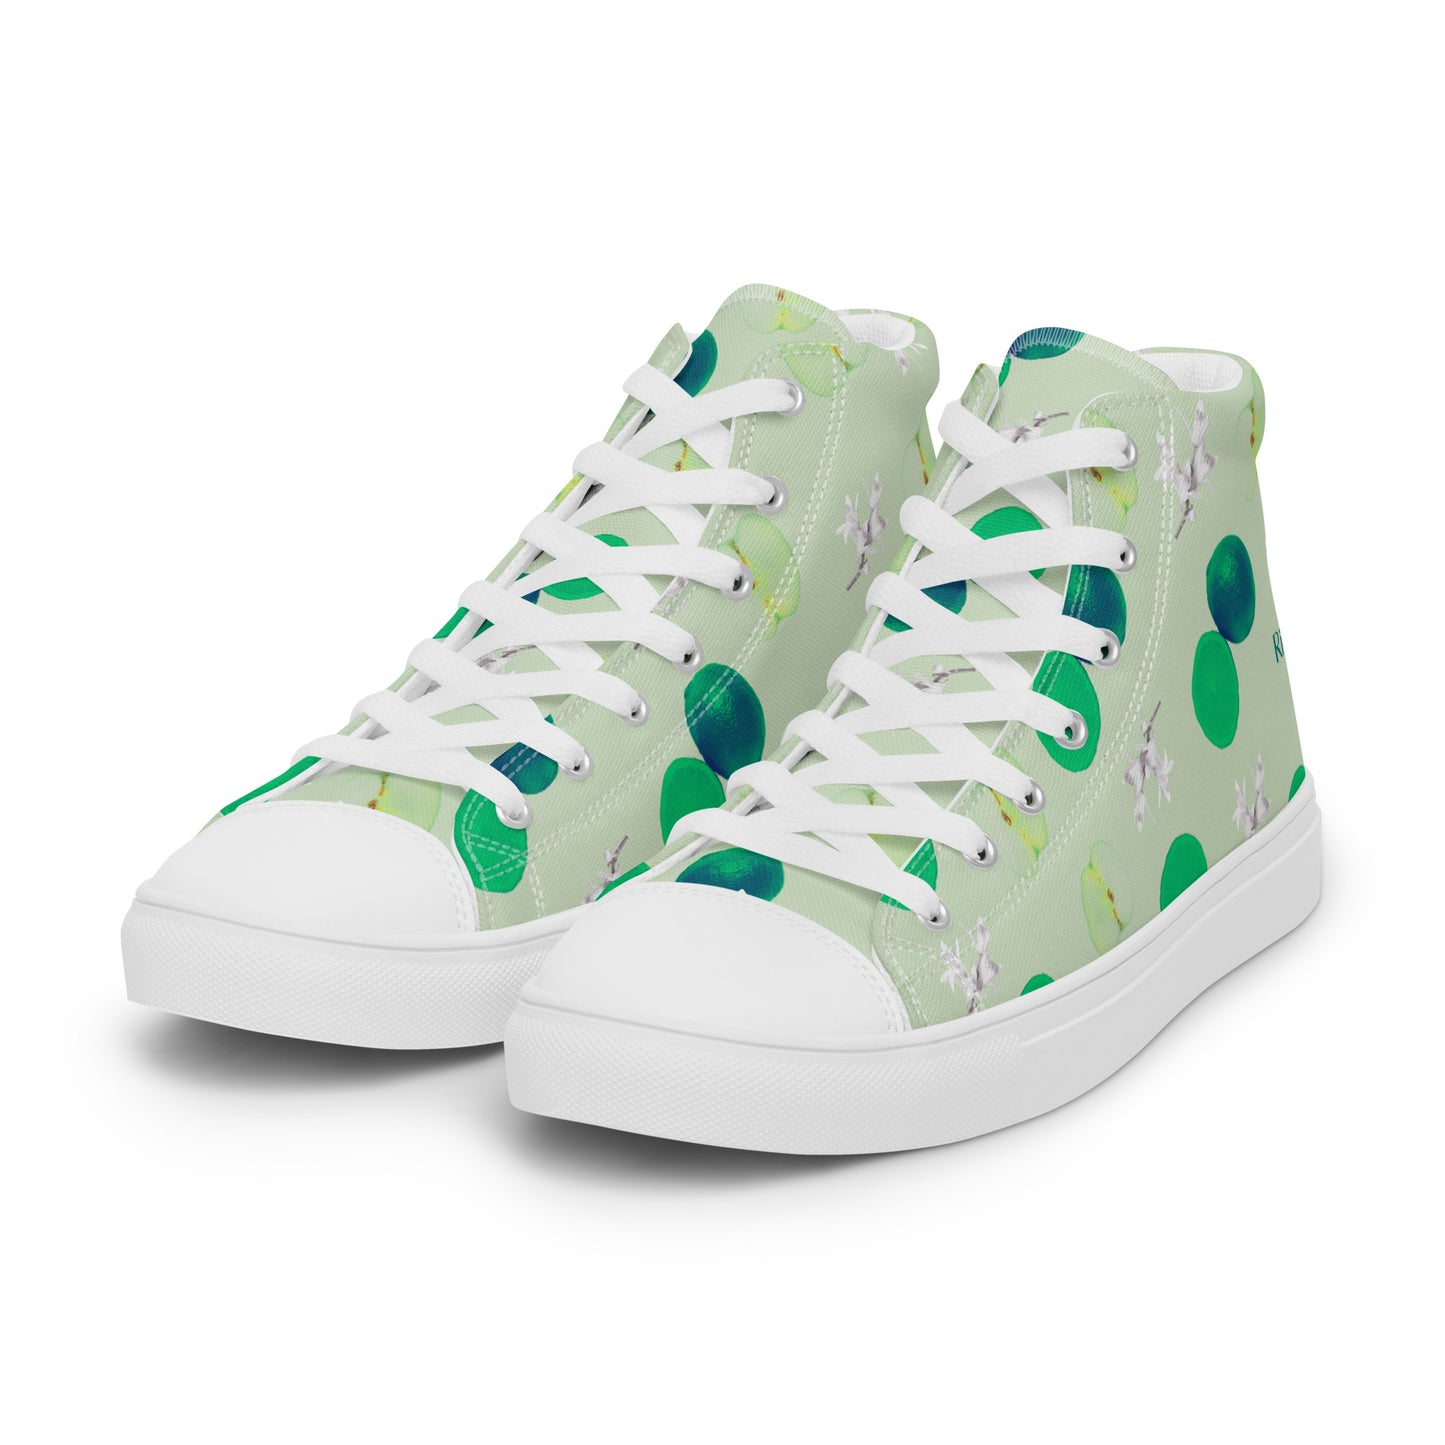 Women’s high top canvas Riesling shoes